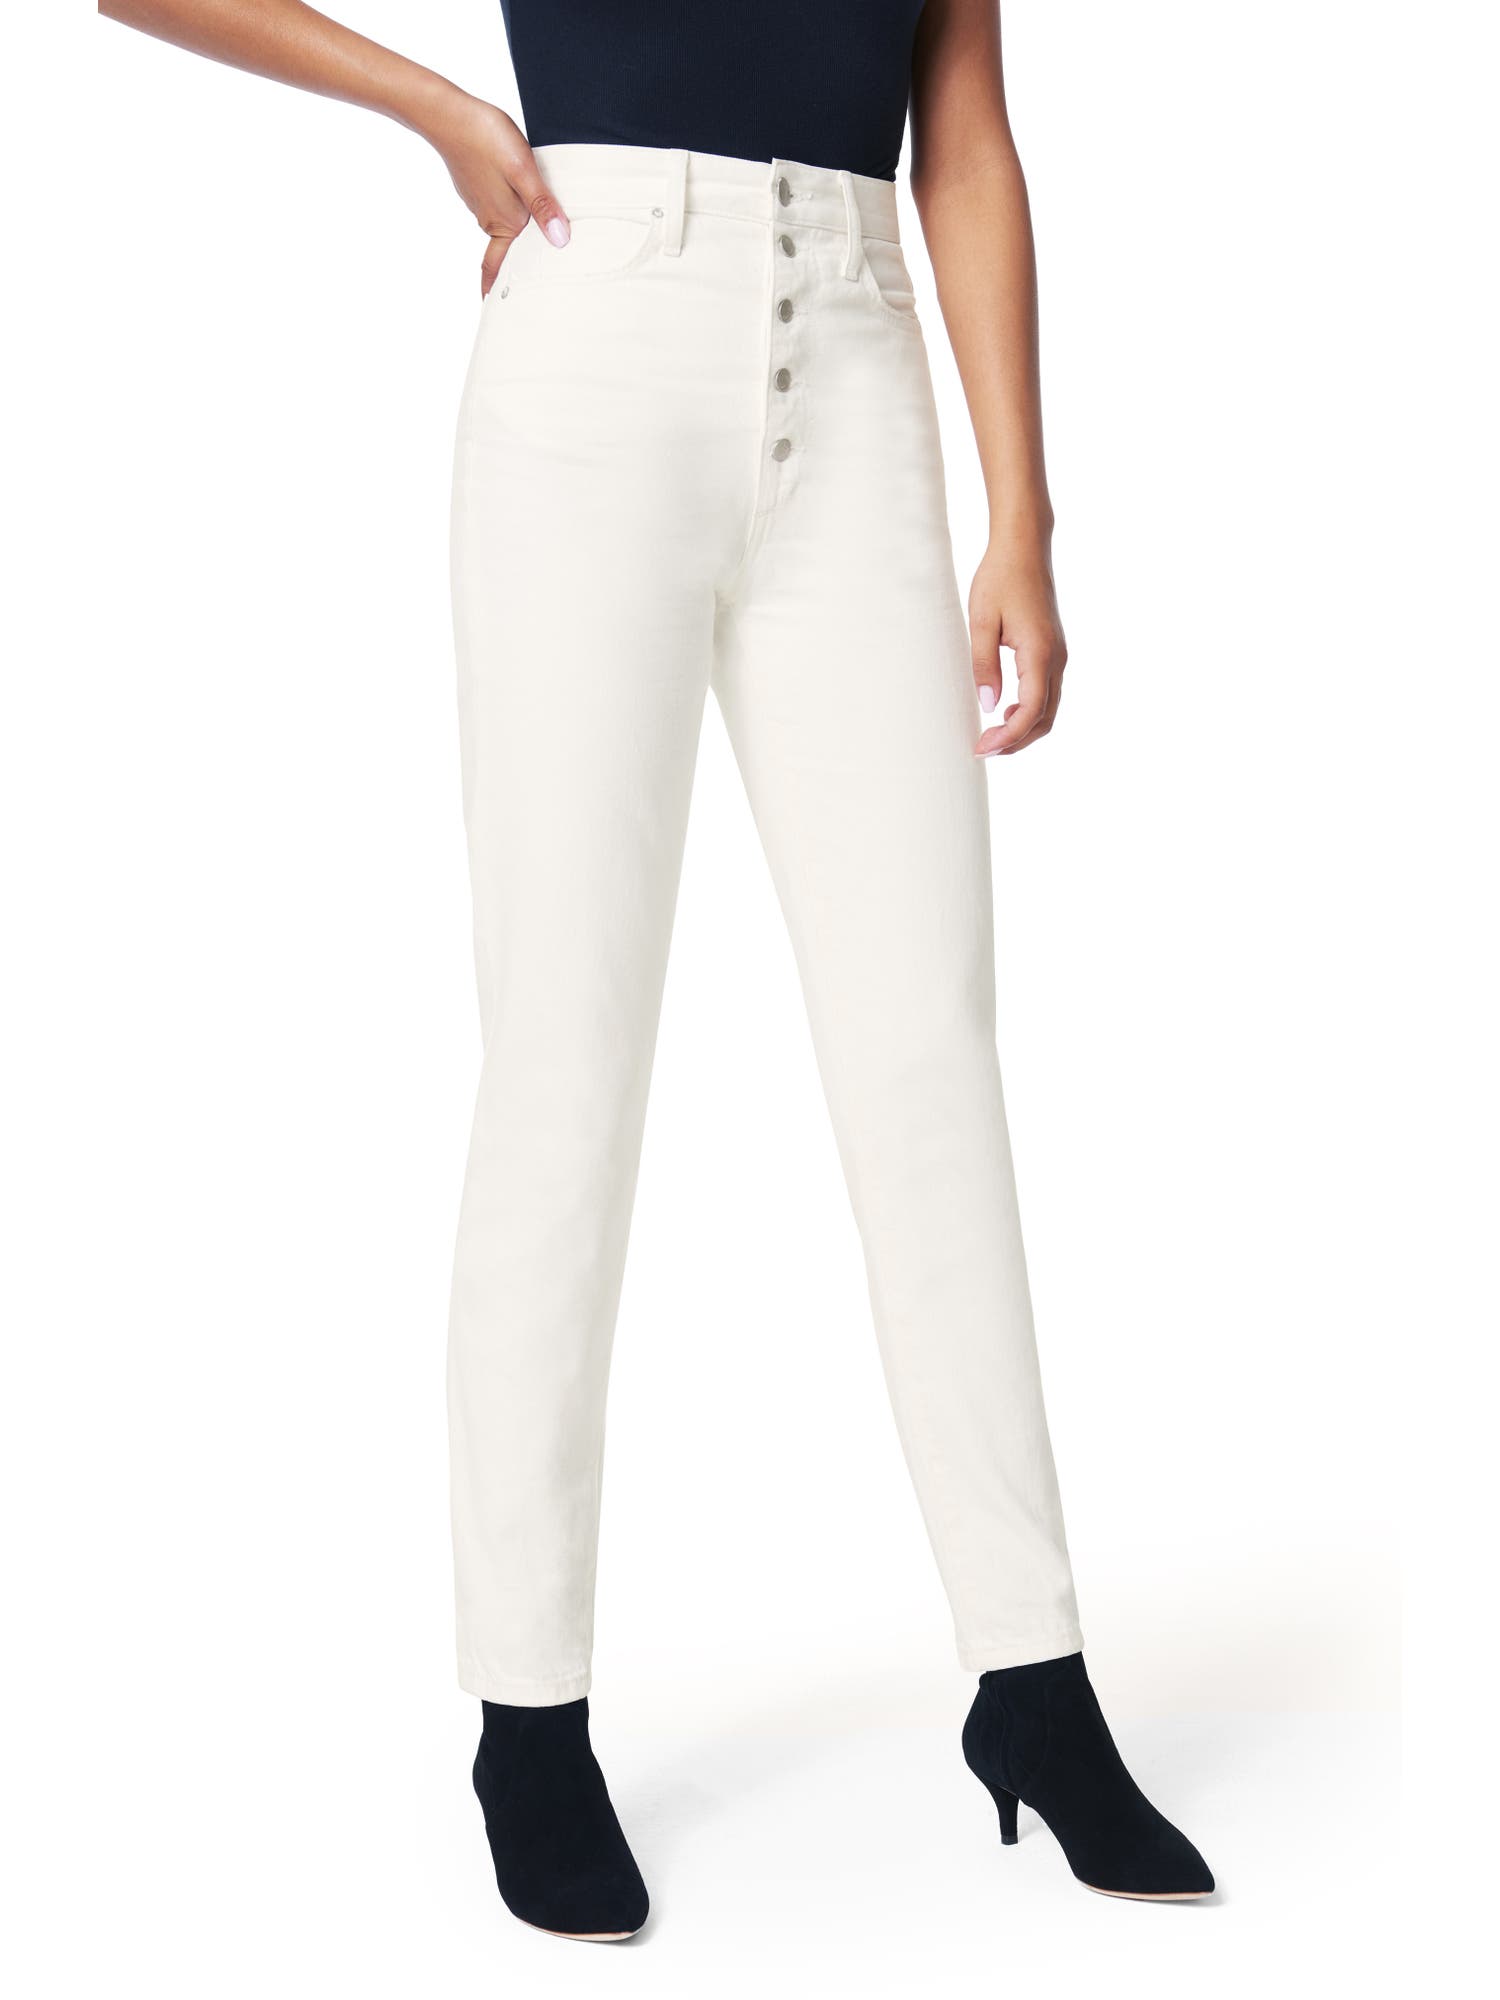 woocommerce-673321-2209615.cloudwaysapps.com-joes-jeans-x-weworewhat-womens-white-the-danielle-high-rise-vintage-straight-jeans